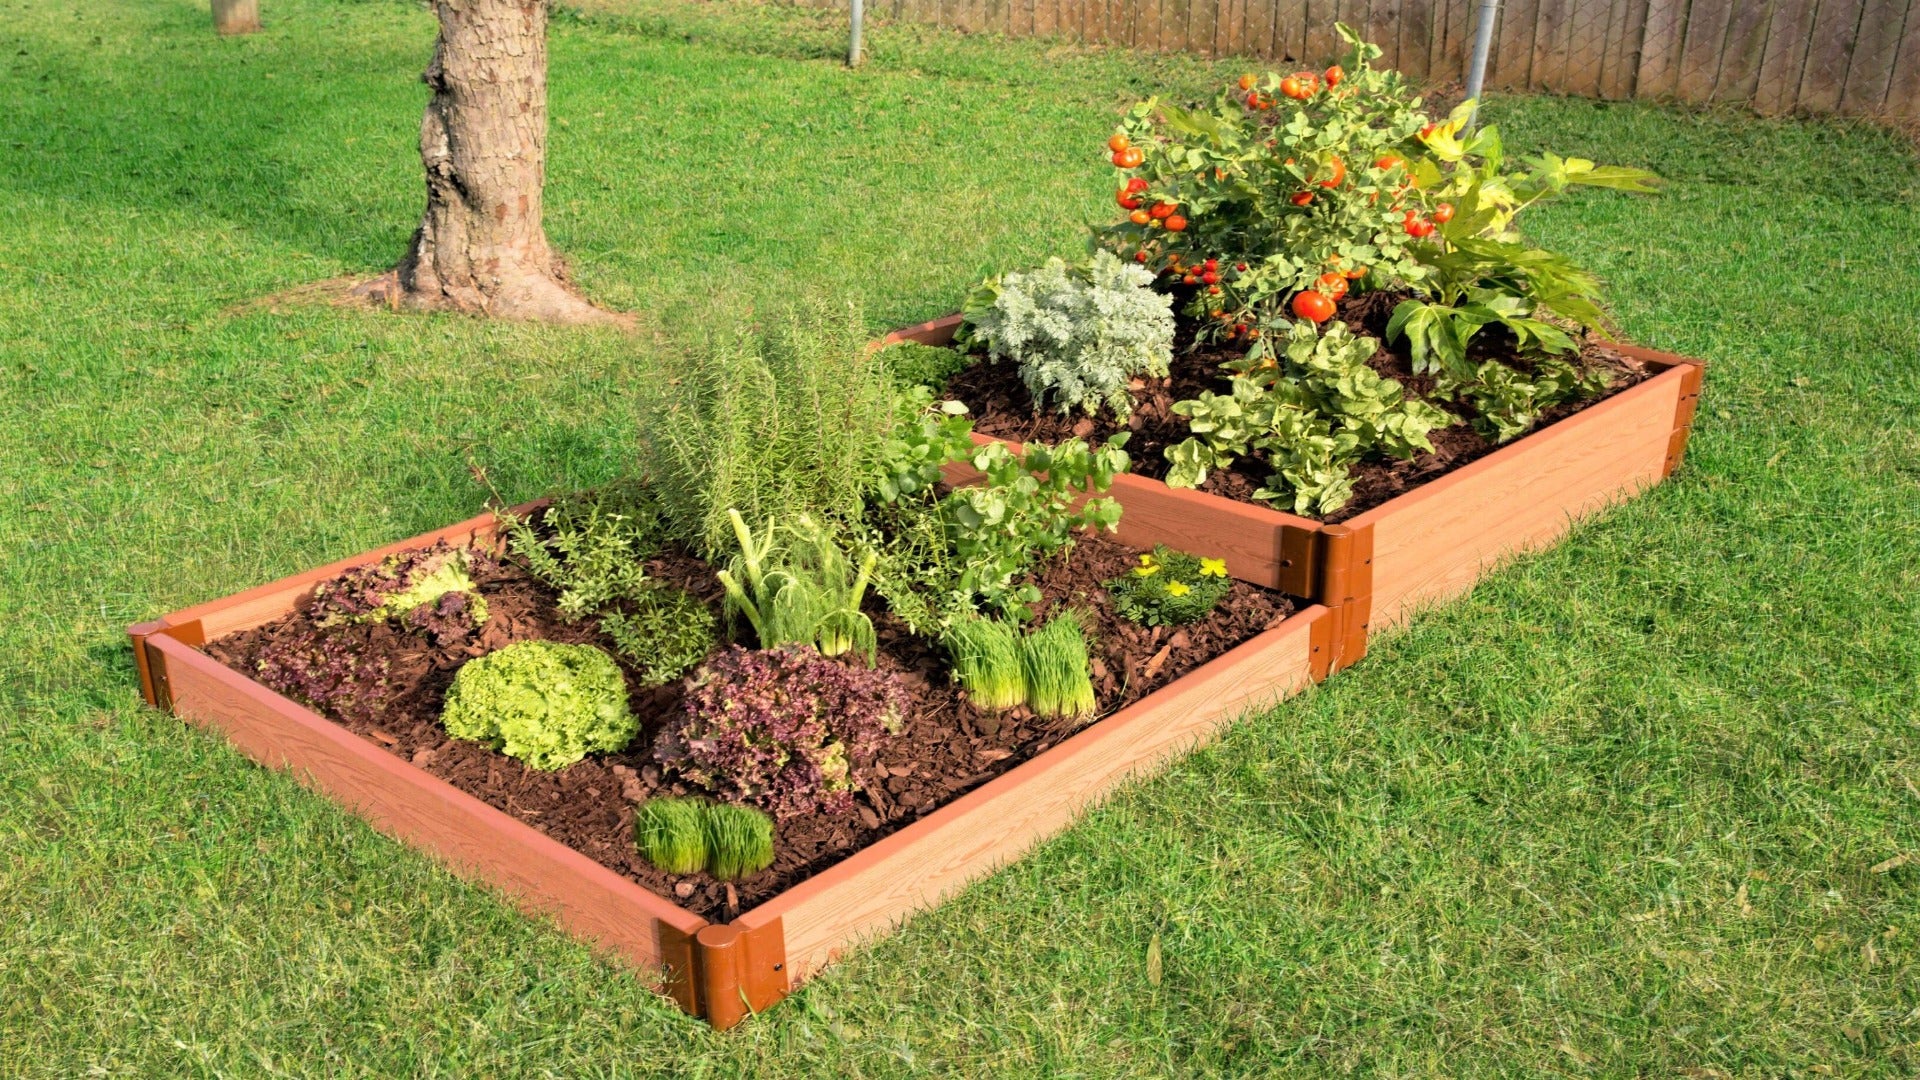 Tool-Free 'Stepper' - 4’ x 8’ x 11" Terrace Garden Raised Bed (Double Tier) Raised Garden Beds Frame It All Classic Sienna 2" 